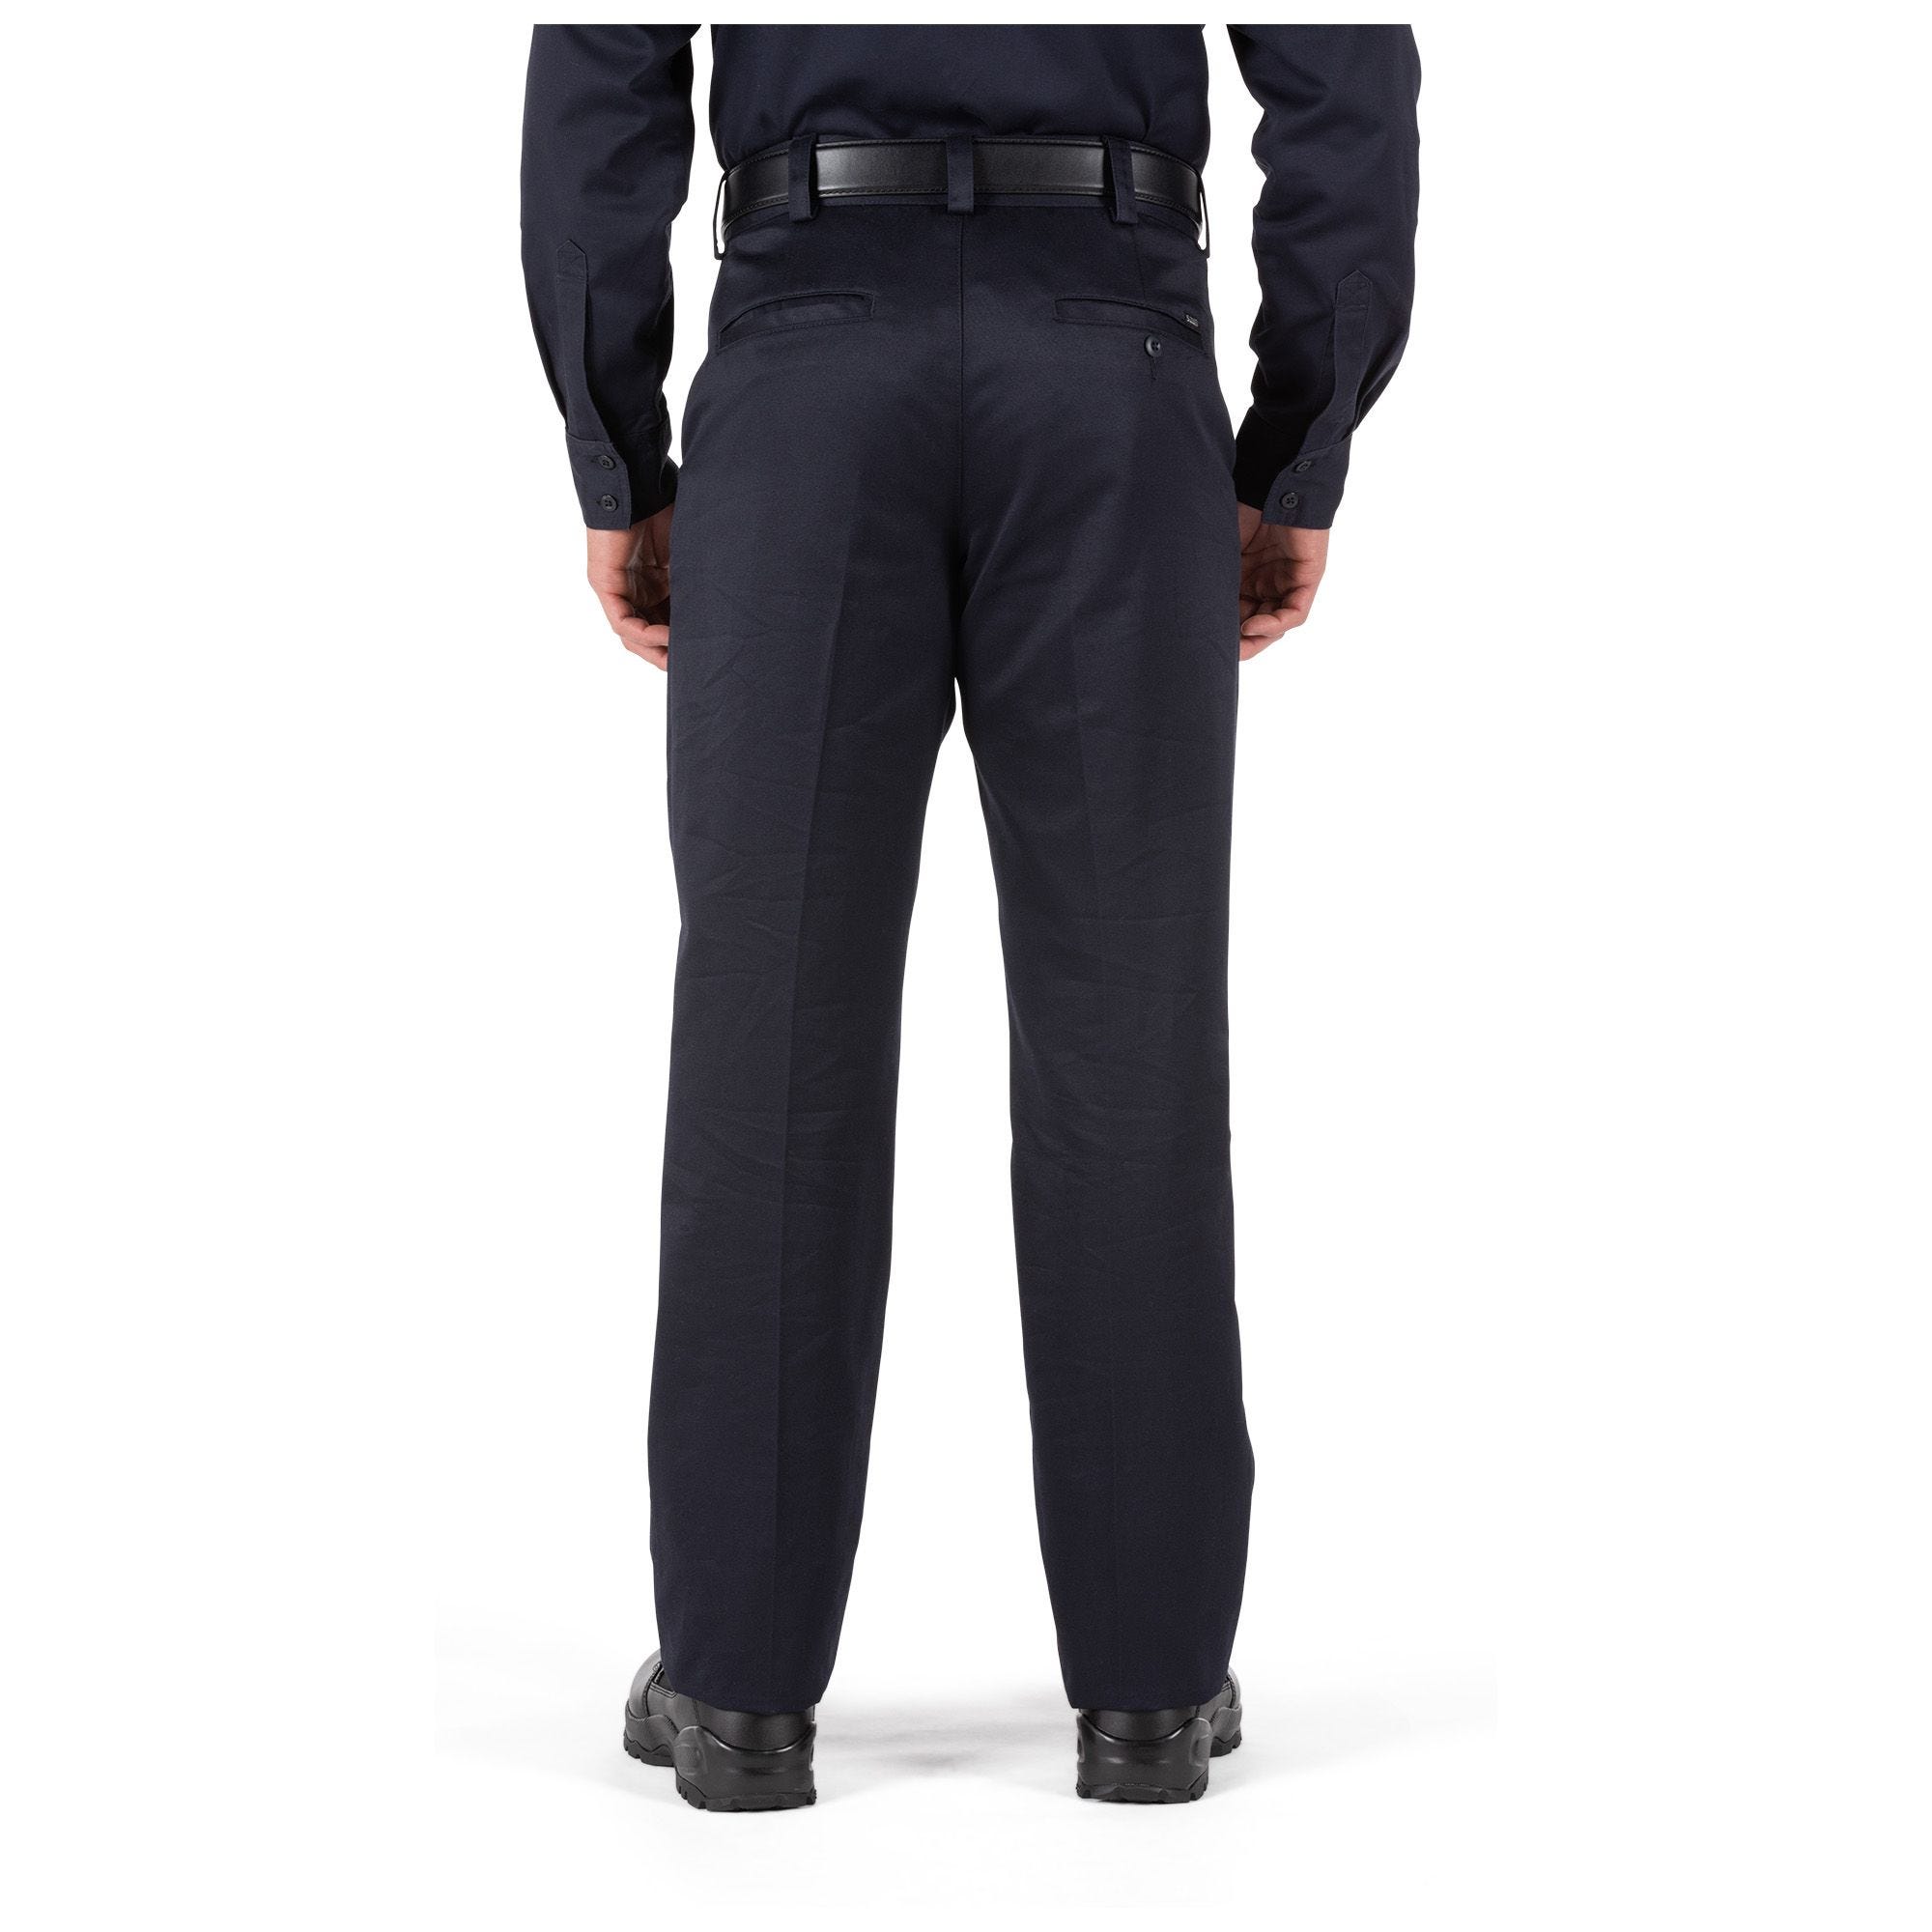 5.11 Tactical Company Pant 2.0 | Fire and Safety